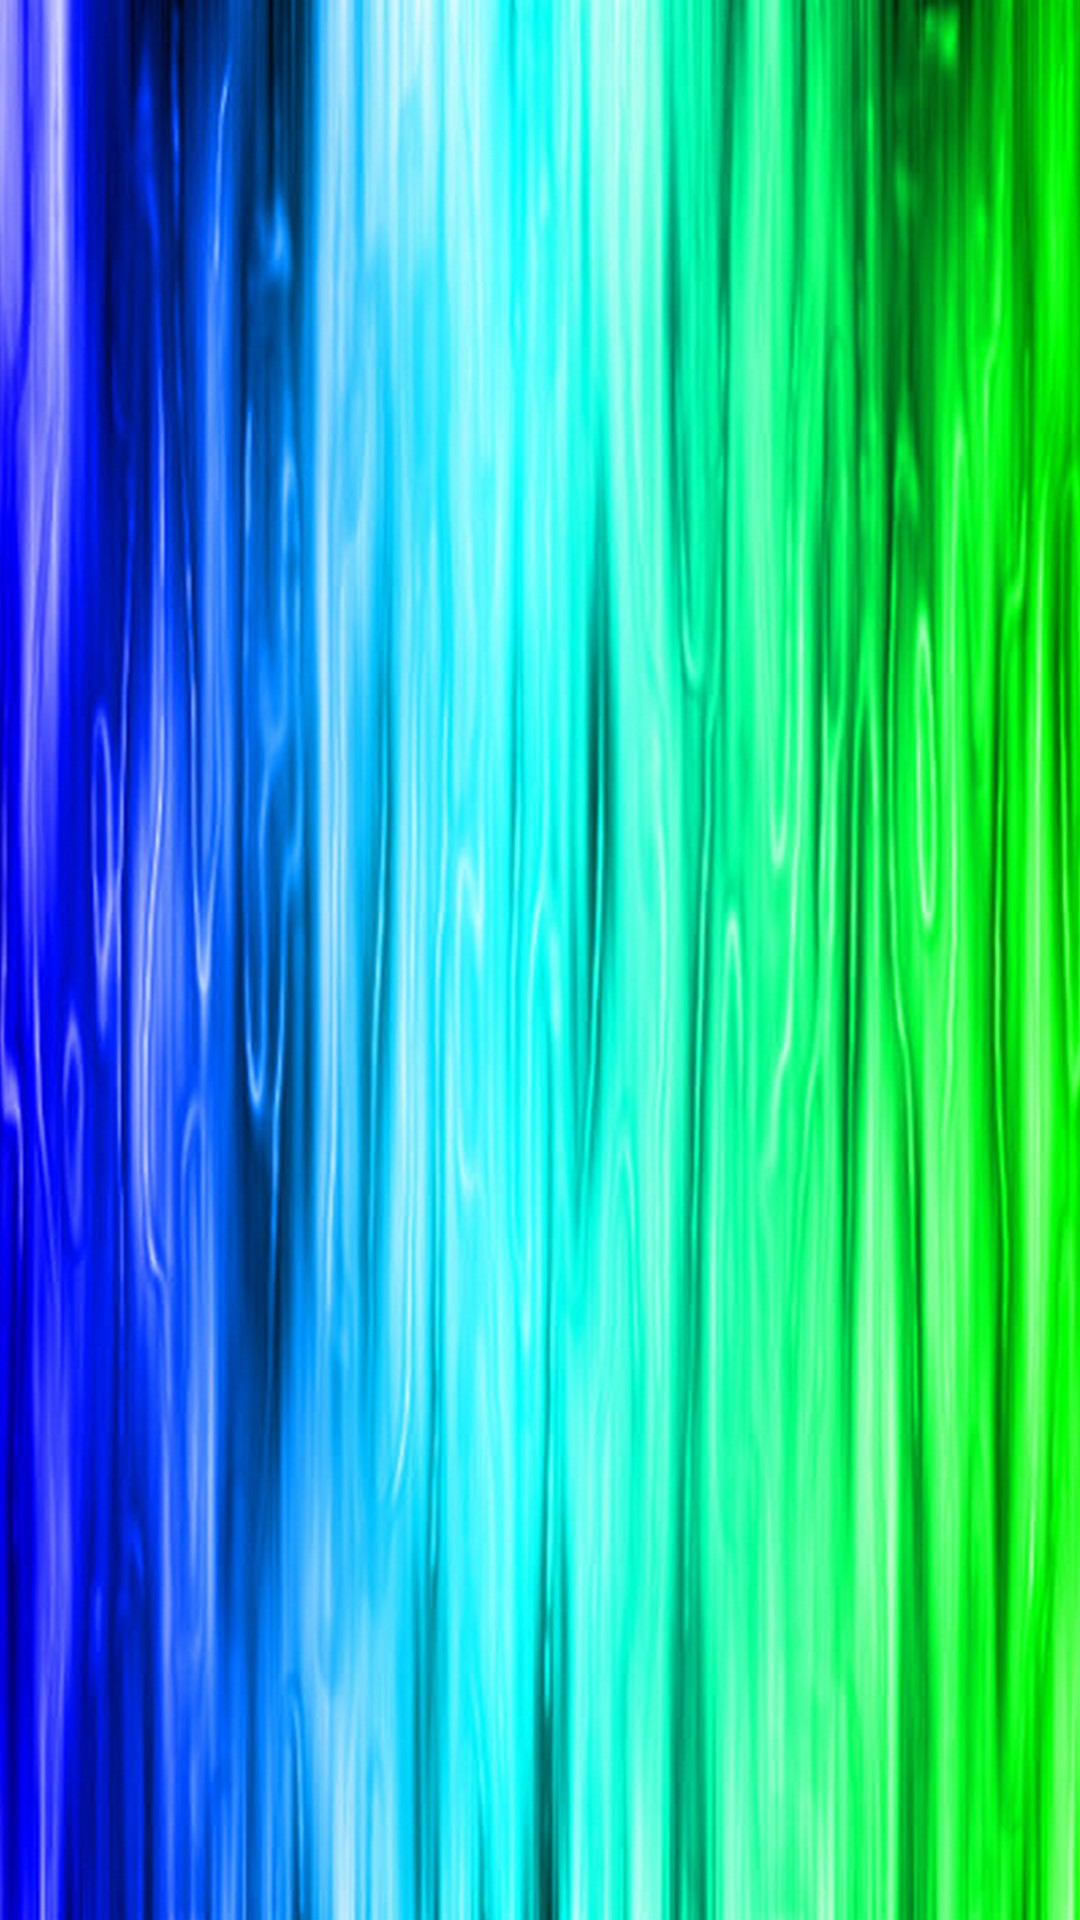 Mobile Wallpapers Rainbow Colors with image resolution 1080x1920 pixel. You can make this wallpaper for your iPhone 5, 6, 7, 8, X backgrounds, Mobile Screensaver, or iPad Lock Screen